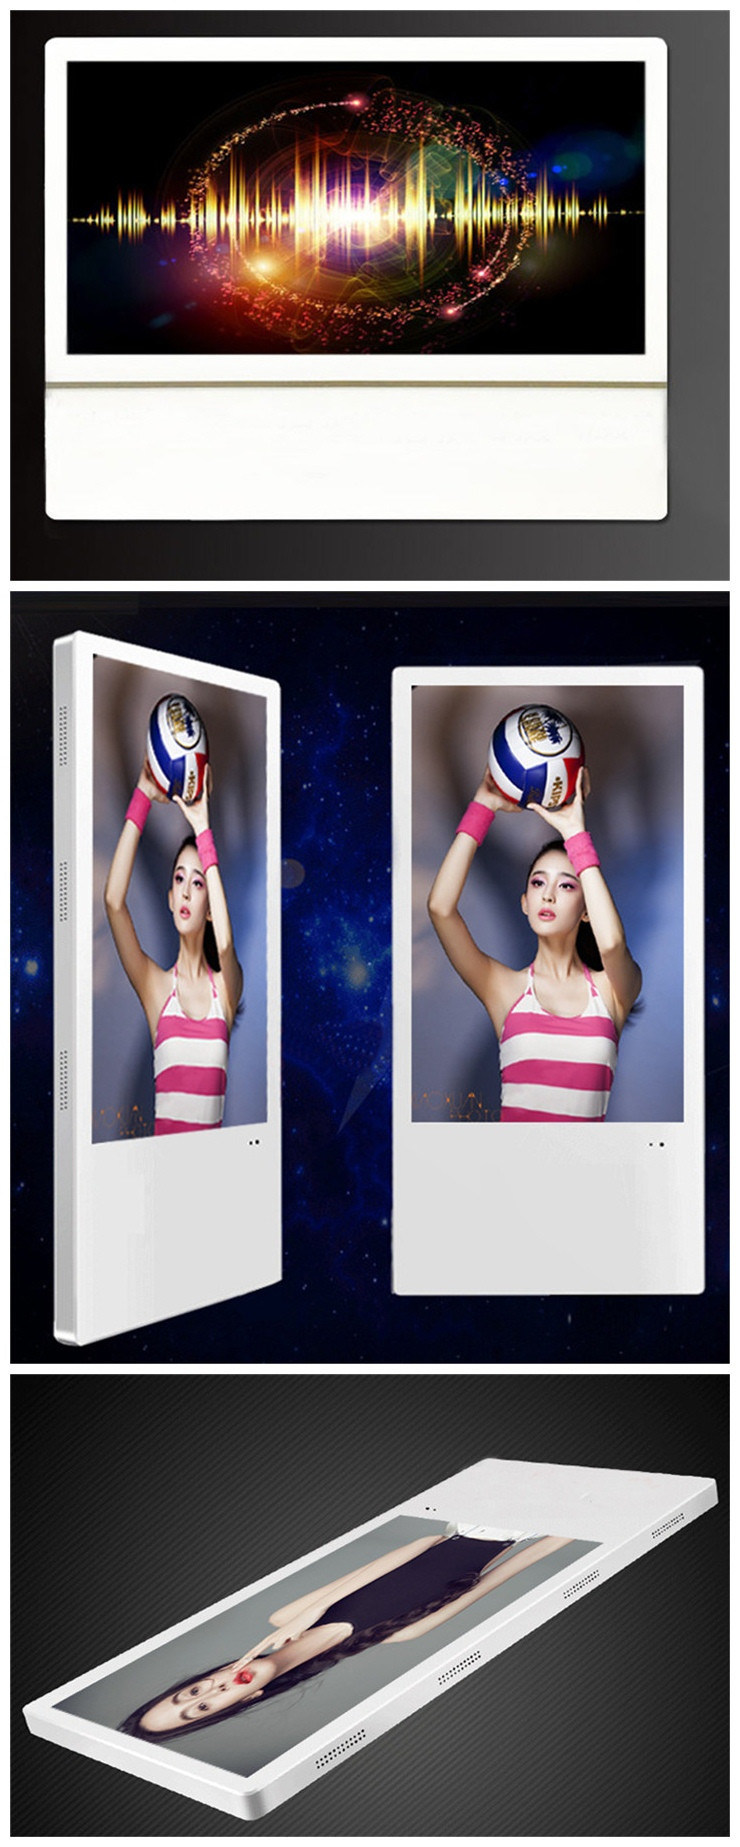 21.5 Inch Wall Advertising Screen Ad Player Floor Standing Ice Cream Kiosk Digital Advertising Screens for Sale LCD Digital Signage with ISO9001 Certificates